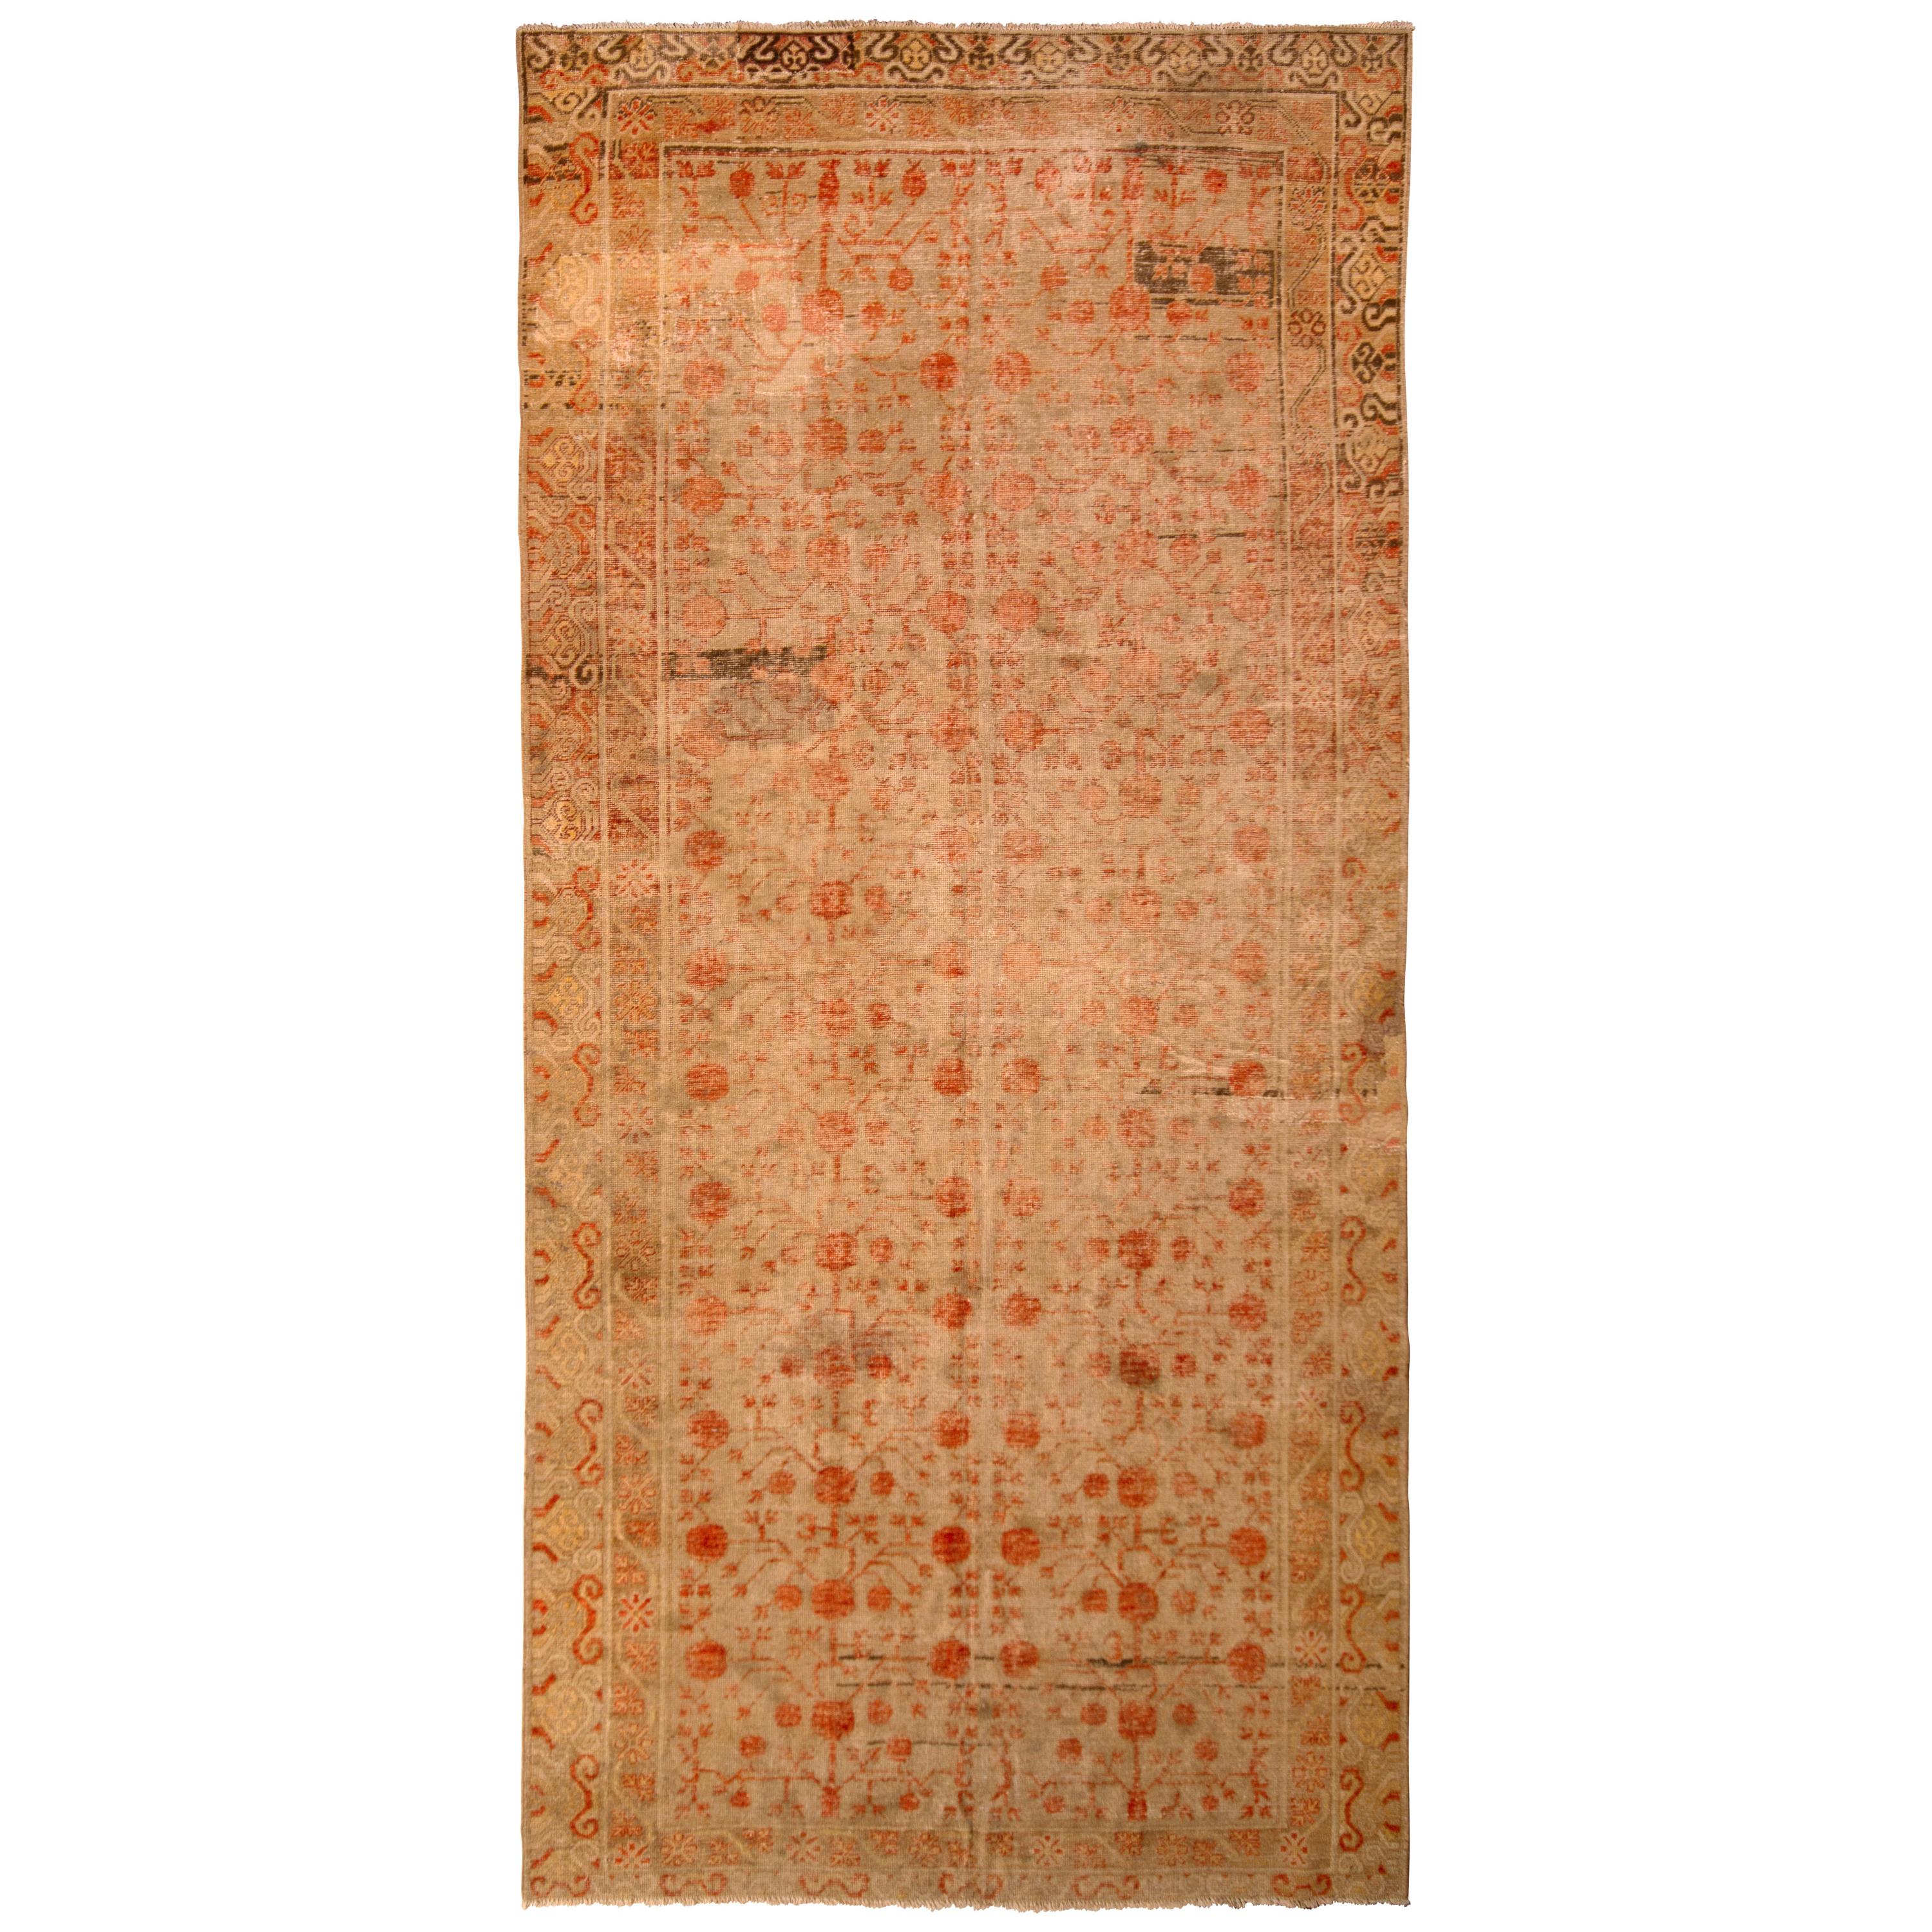 Hand knotted in wool originating from East Turkestan circa 1890-1900, this antique rug is one of the most spacious we’ve seen from the Khotan rug design family, nearly gallery sized in 6’5 x 13’5 with a notable, charming look of wear in the upper